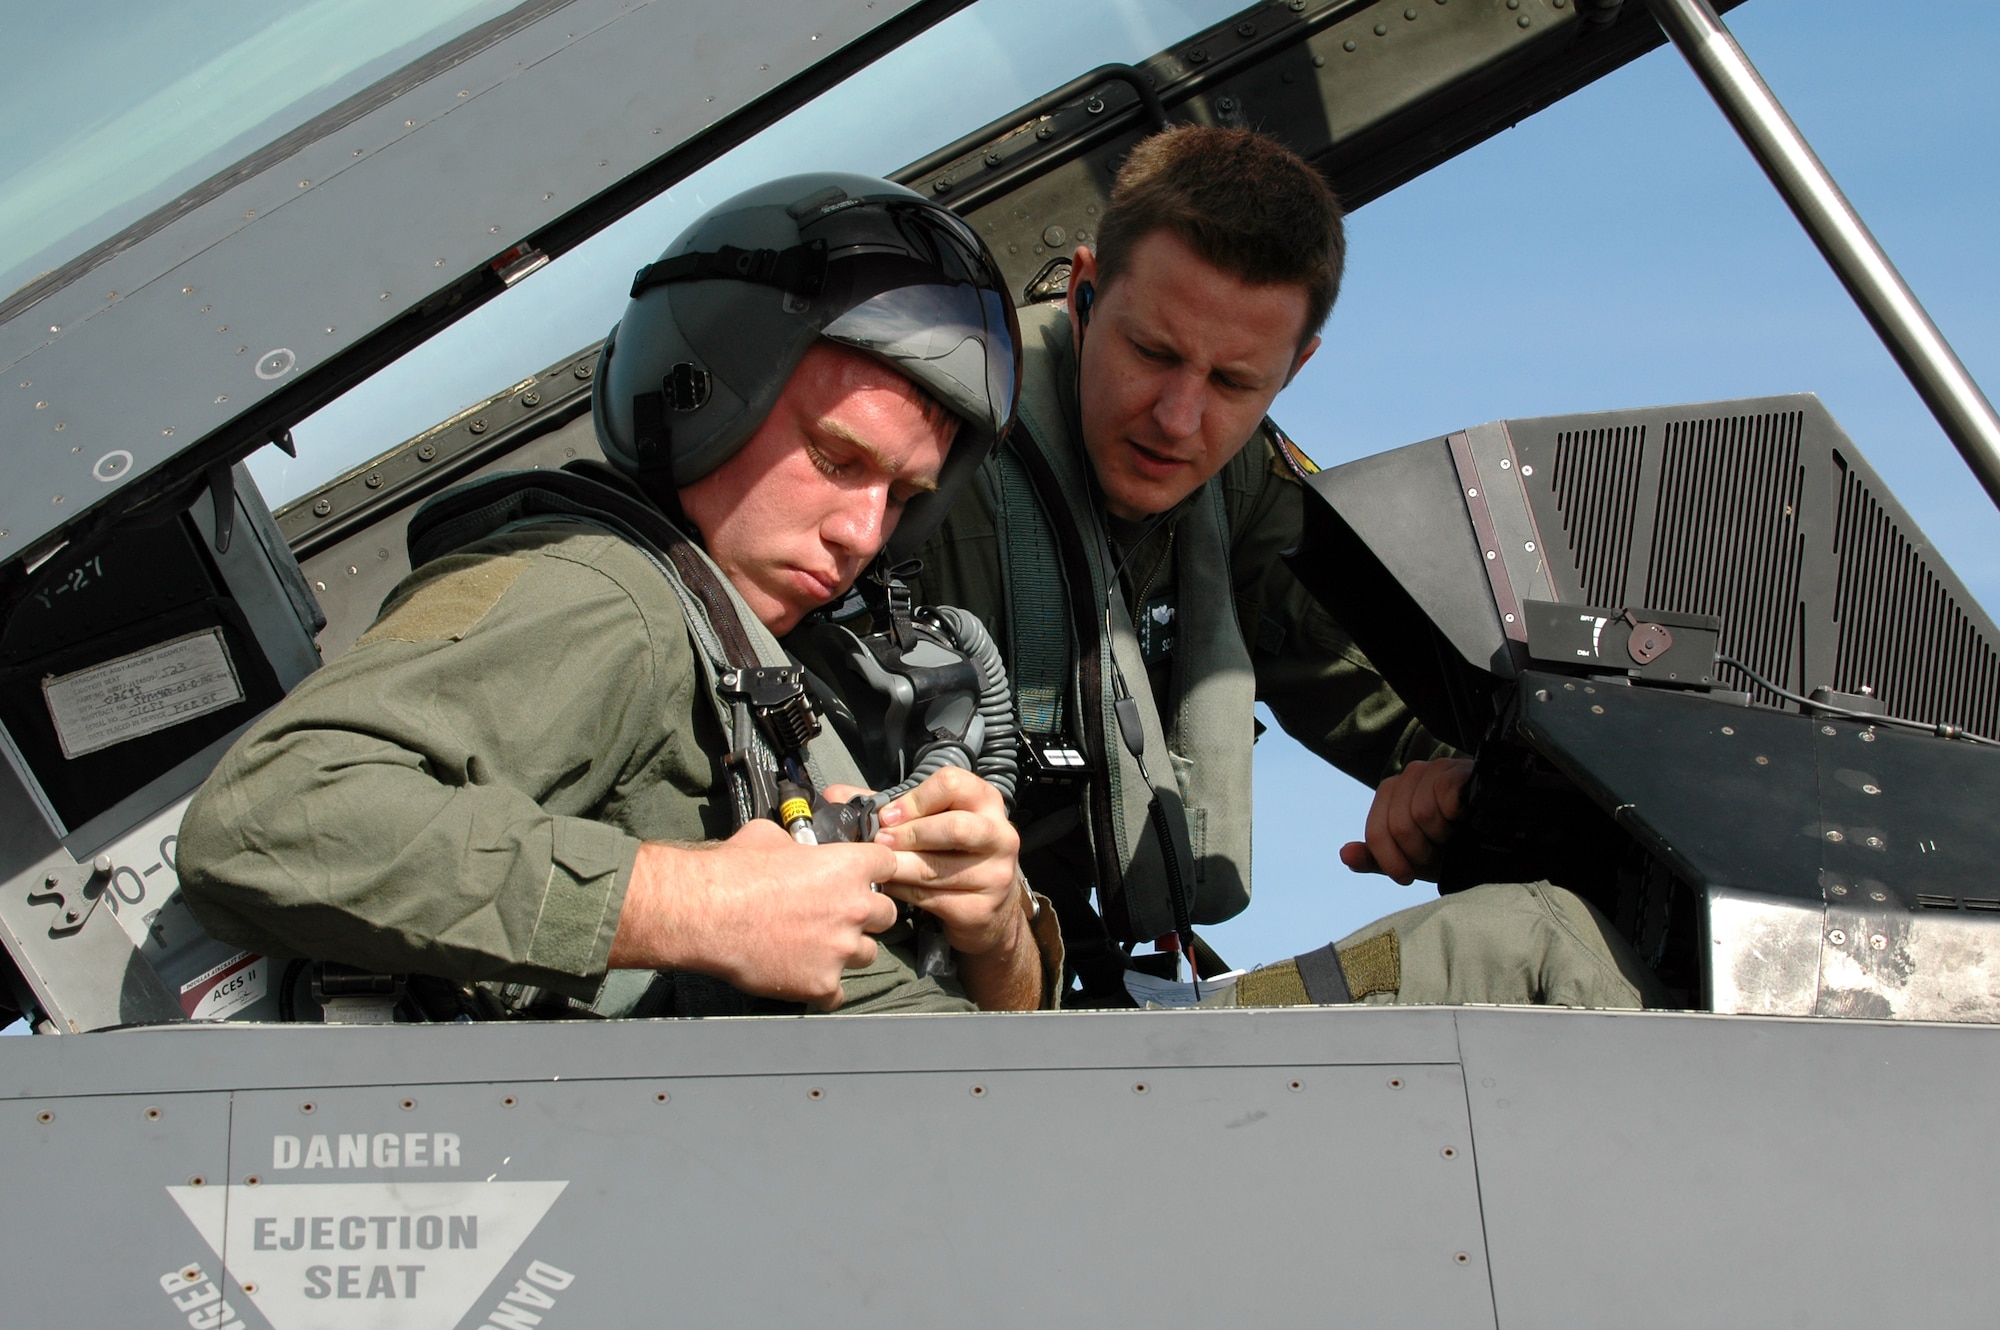 Capt. Ryan Thulin (right), 555th Fighter Squadron pilot, covers a few safety precautions with Staff Sgt. Jared Moffitt, 31st Aircraft Maintenance Squadron weapons load crew member, before flying together on a familiarization flight in an F-16 Aug. 6, 2010 at Kallax Air Base, Sweden. The 555th FS spent two weeks working with the Swedish air force at Norrbotten Wing conducting air-to-air and air-to-ground training missions. (U.S. Air Force photo by Tech. Sgt. Lindsey Maurice/Released)